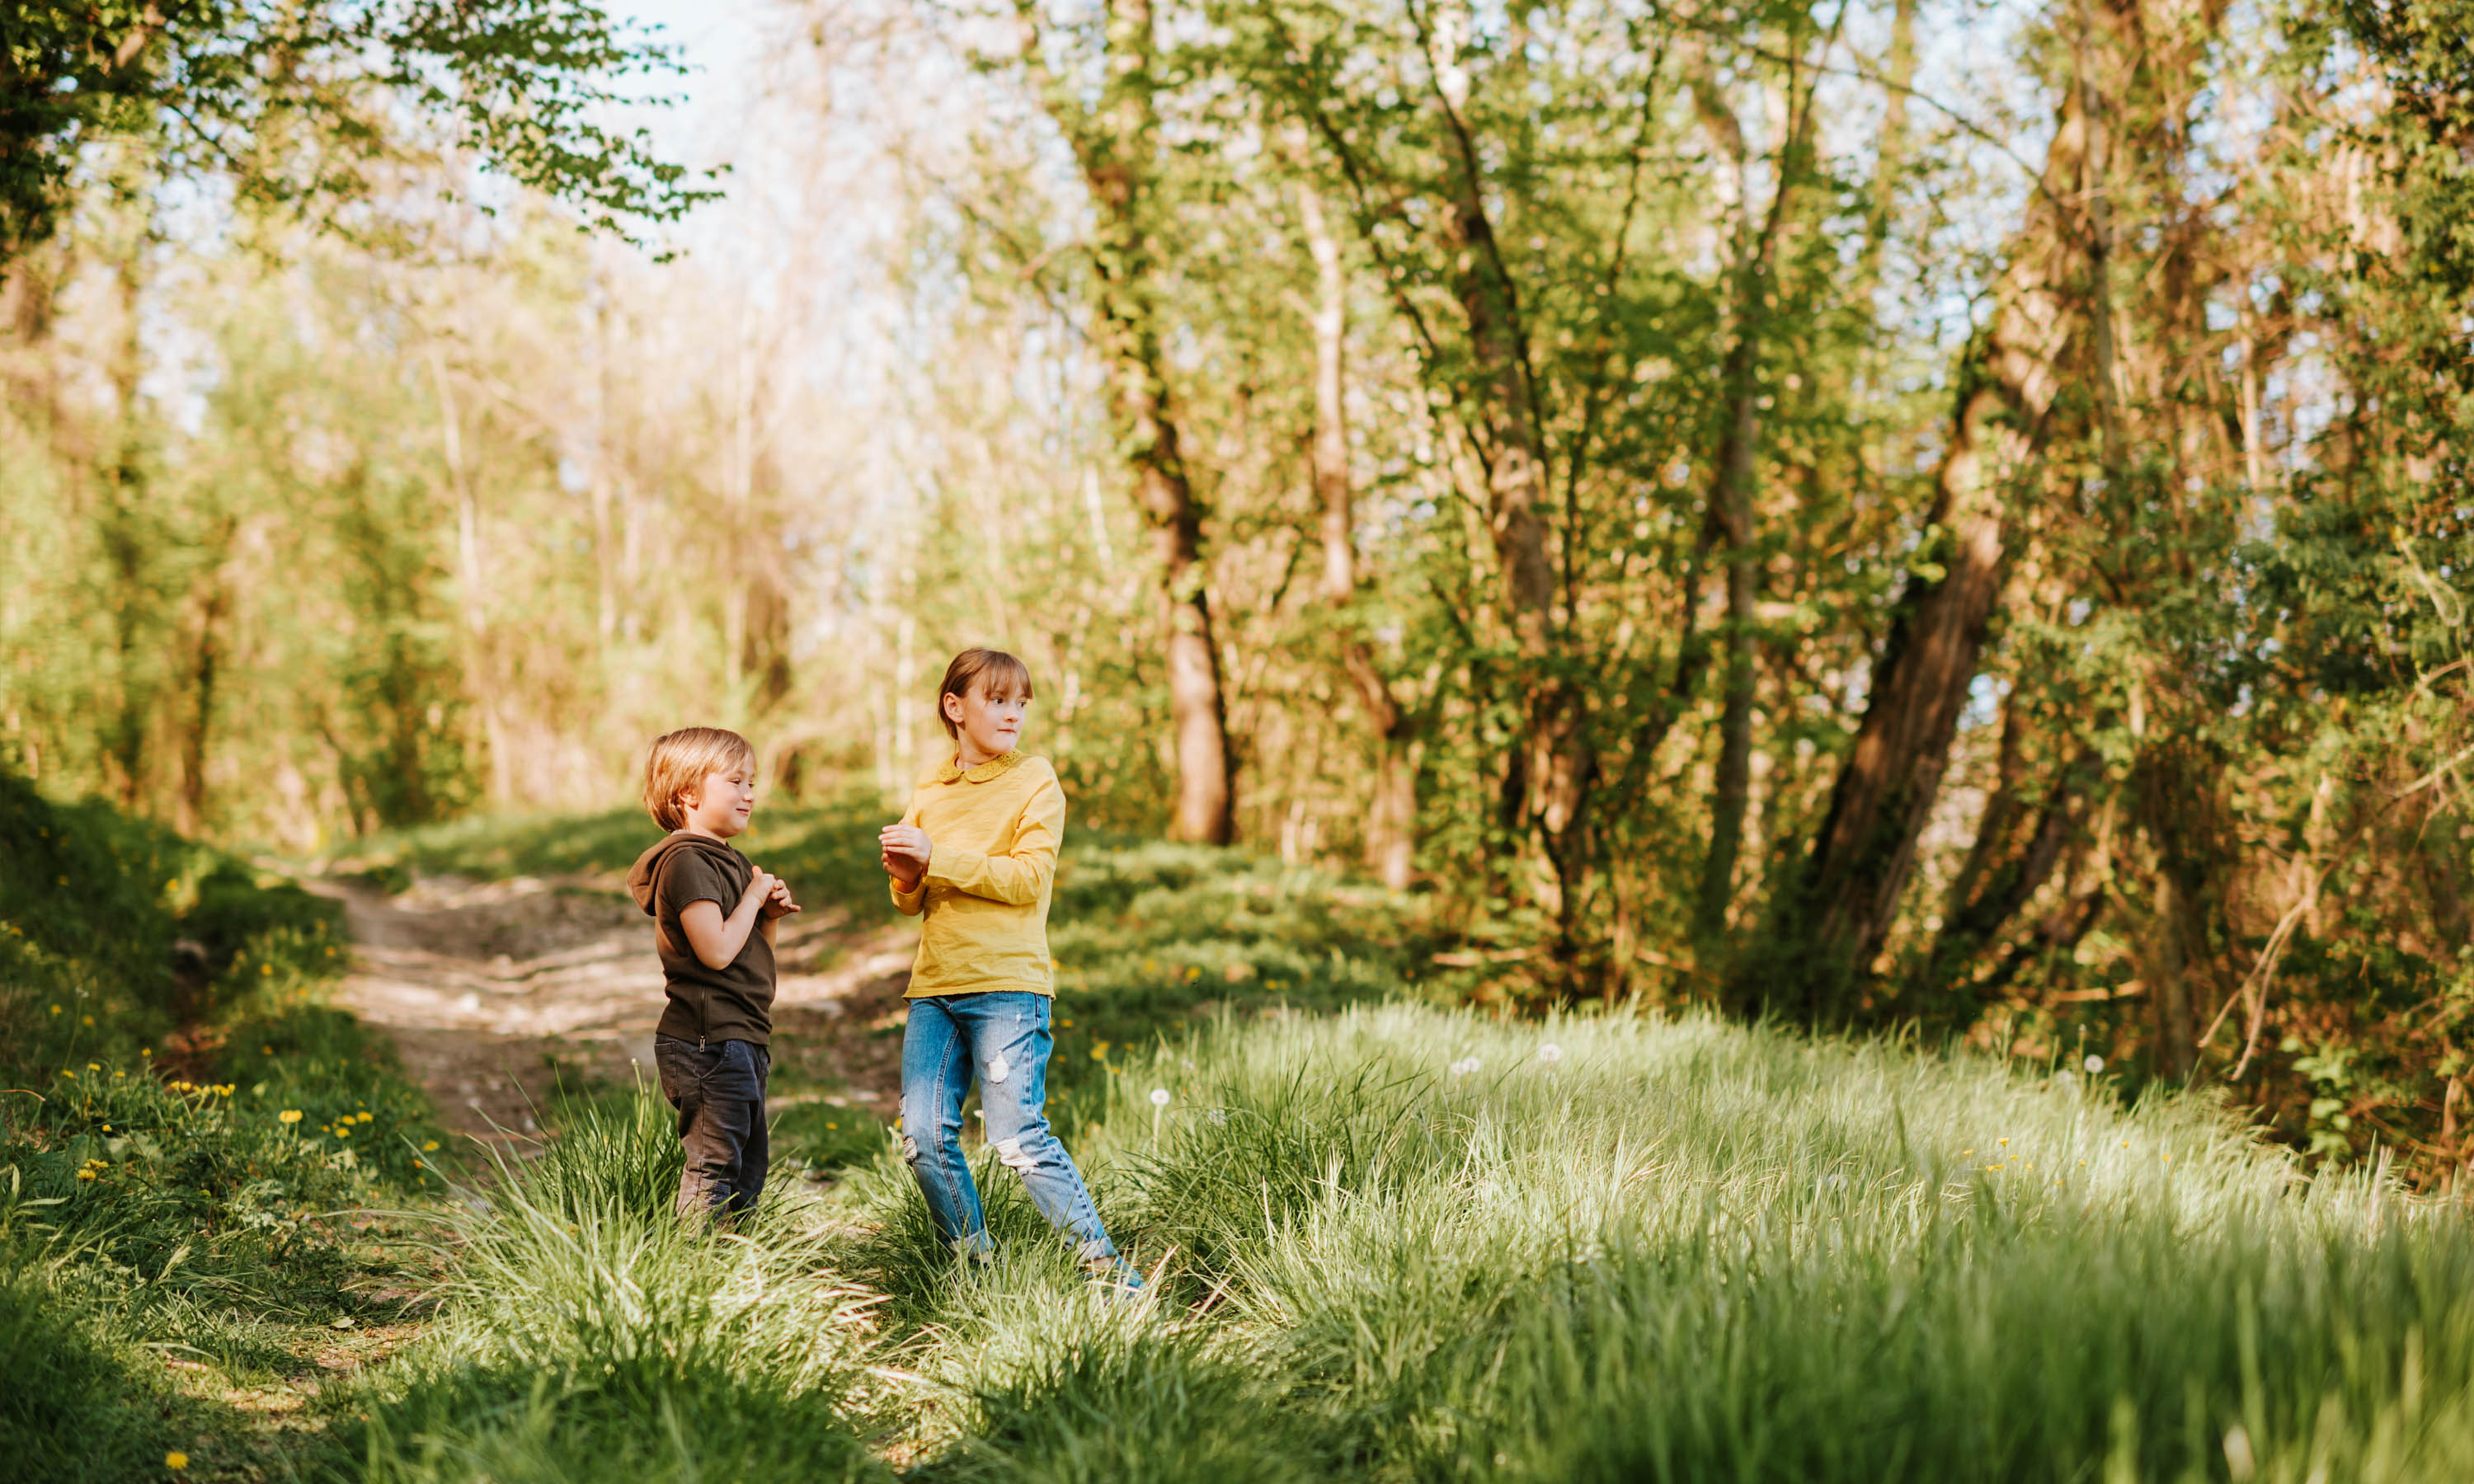 Children playing in nature (Image: annanahabed/Adobe Stock)